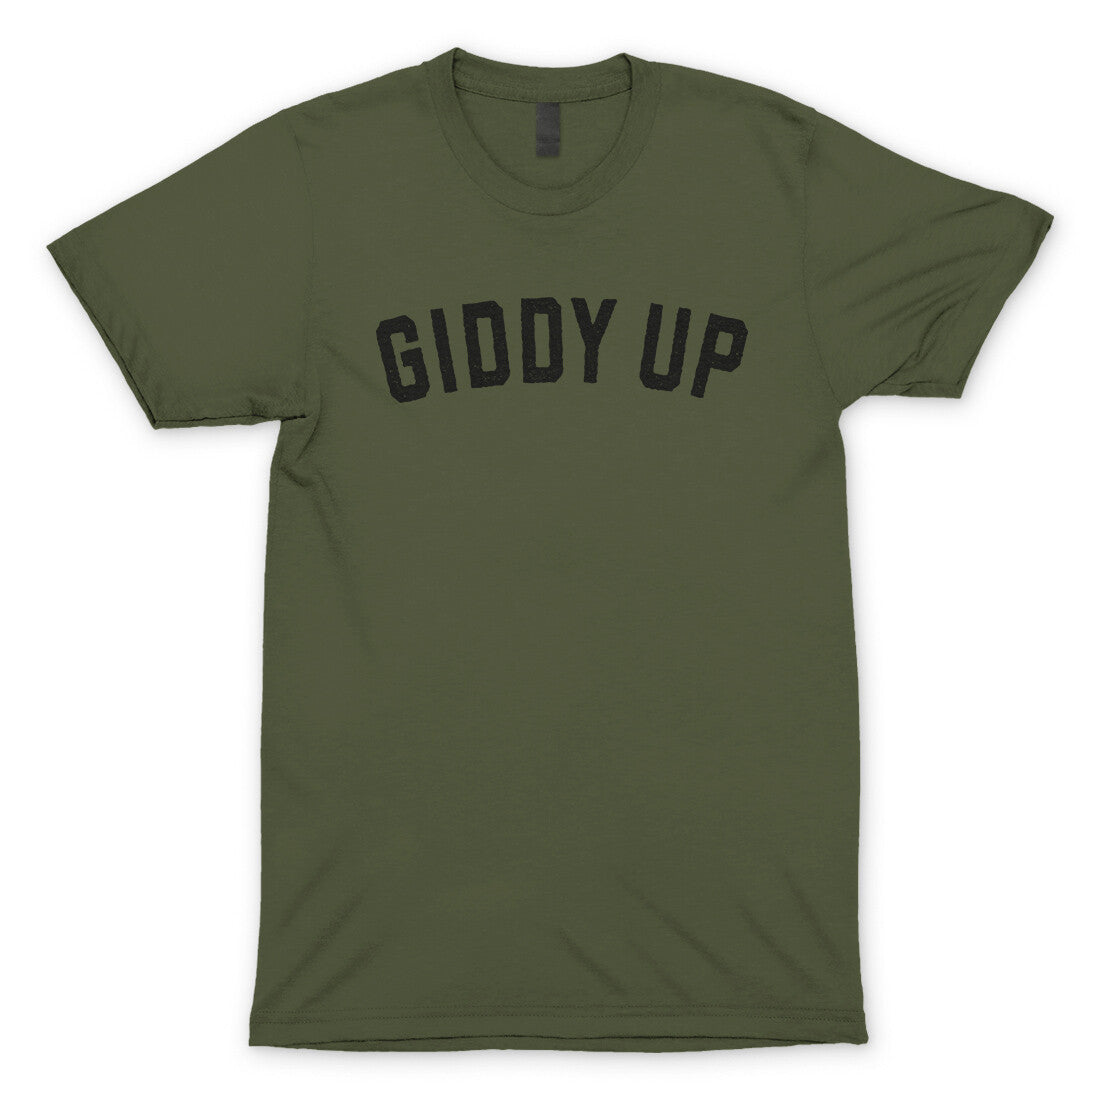 Giddy Up in Military Green Color